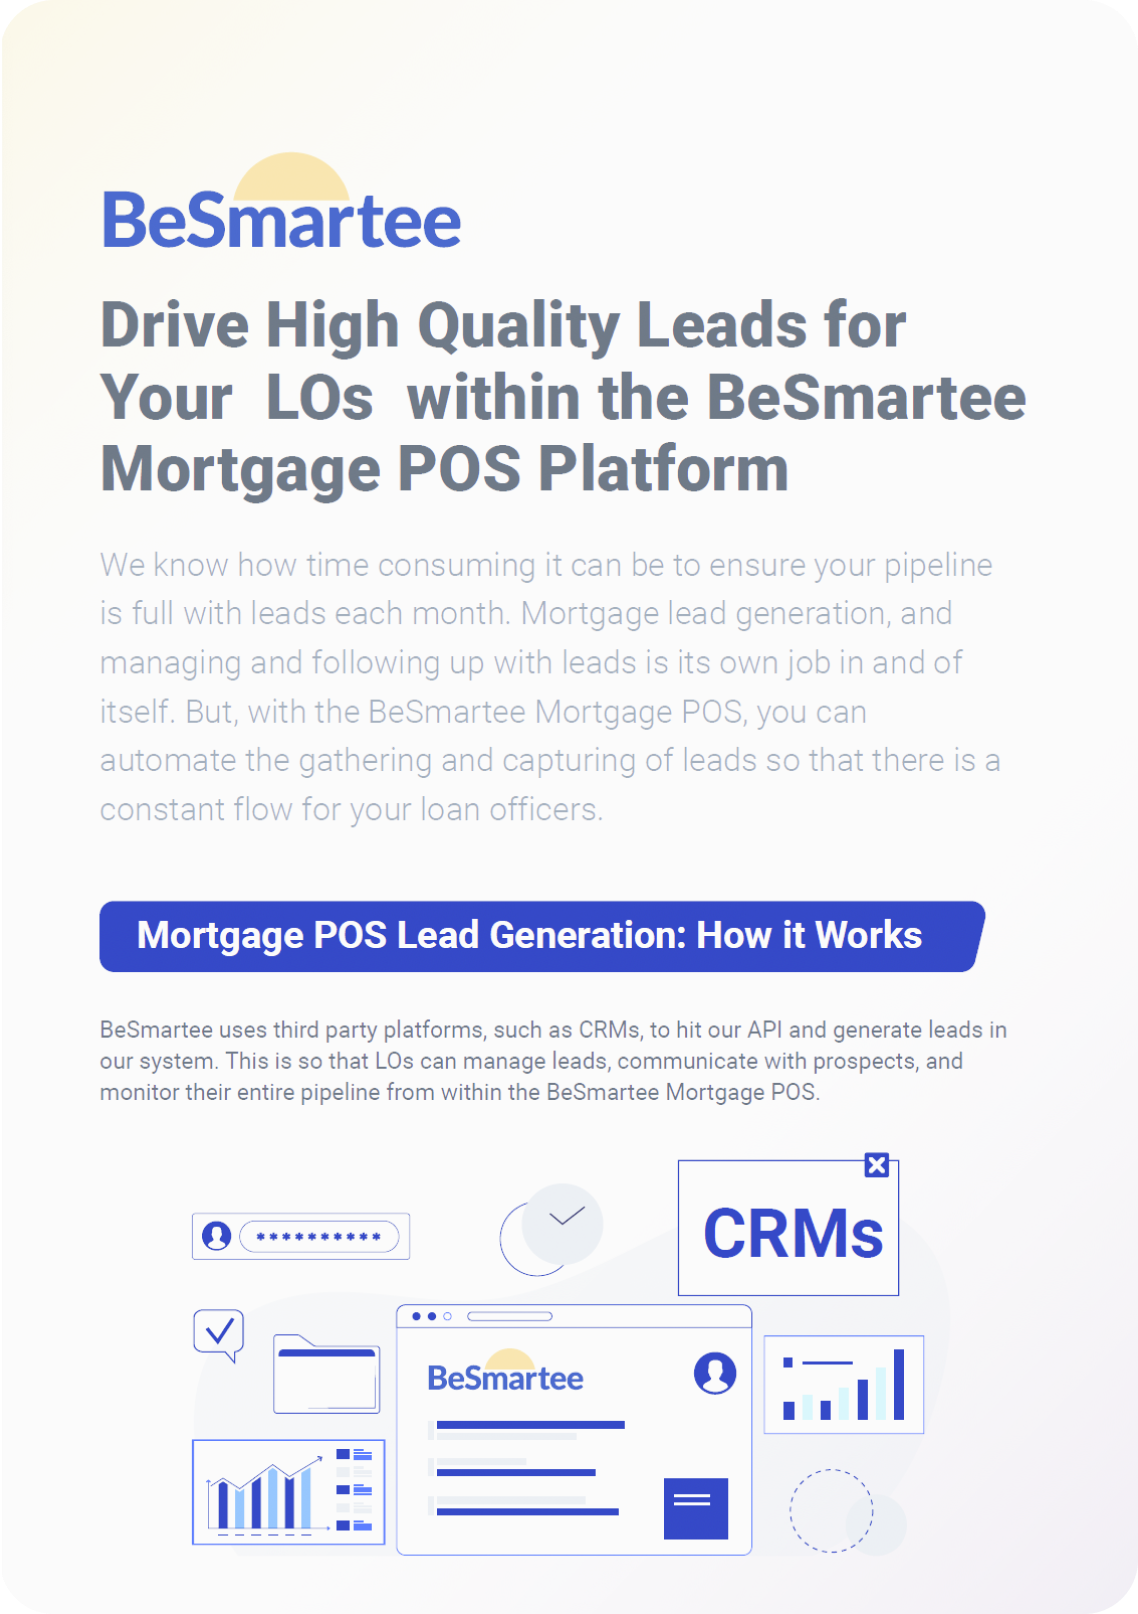 Drive High Quality Leads for Your LOs within the BeSmartee Mortgage POS Platform